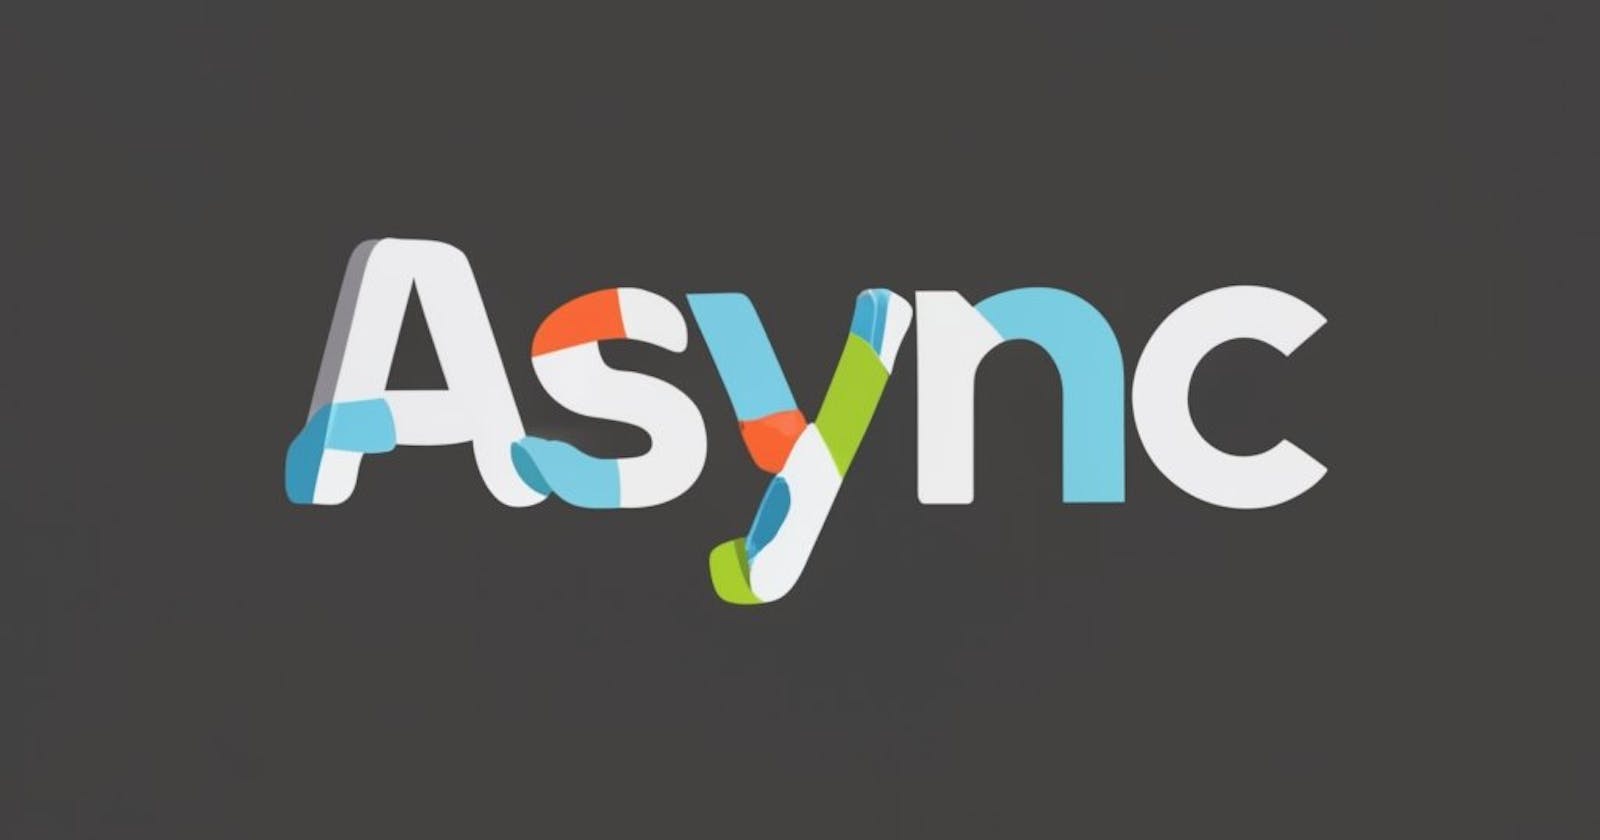 Give an example of async/await on real time